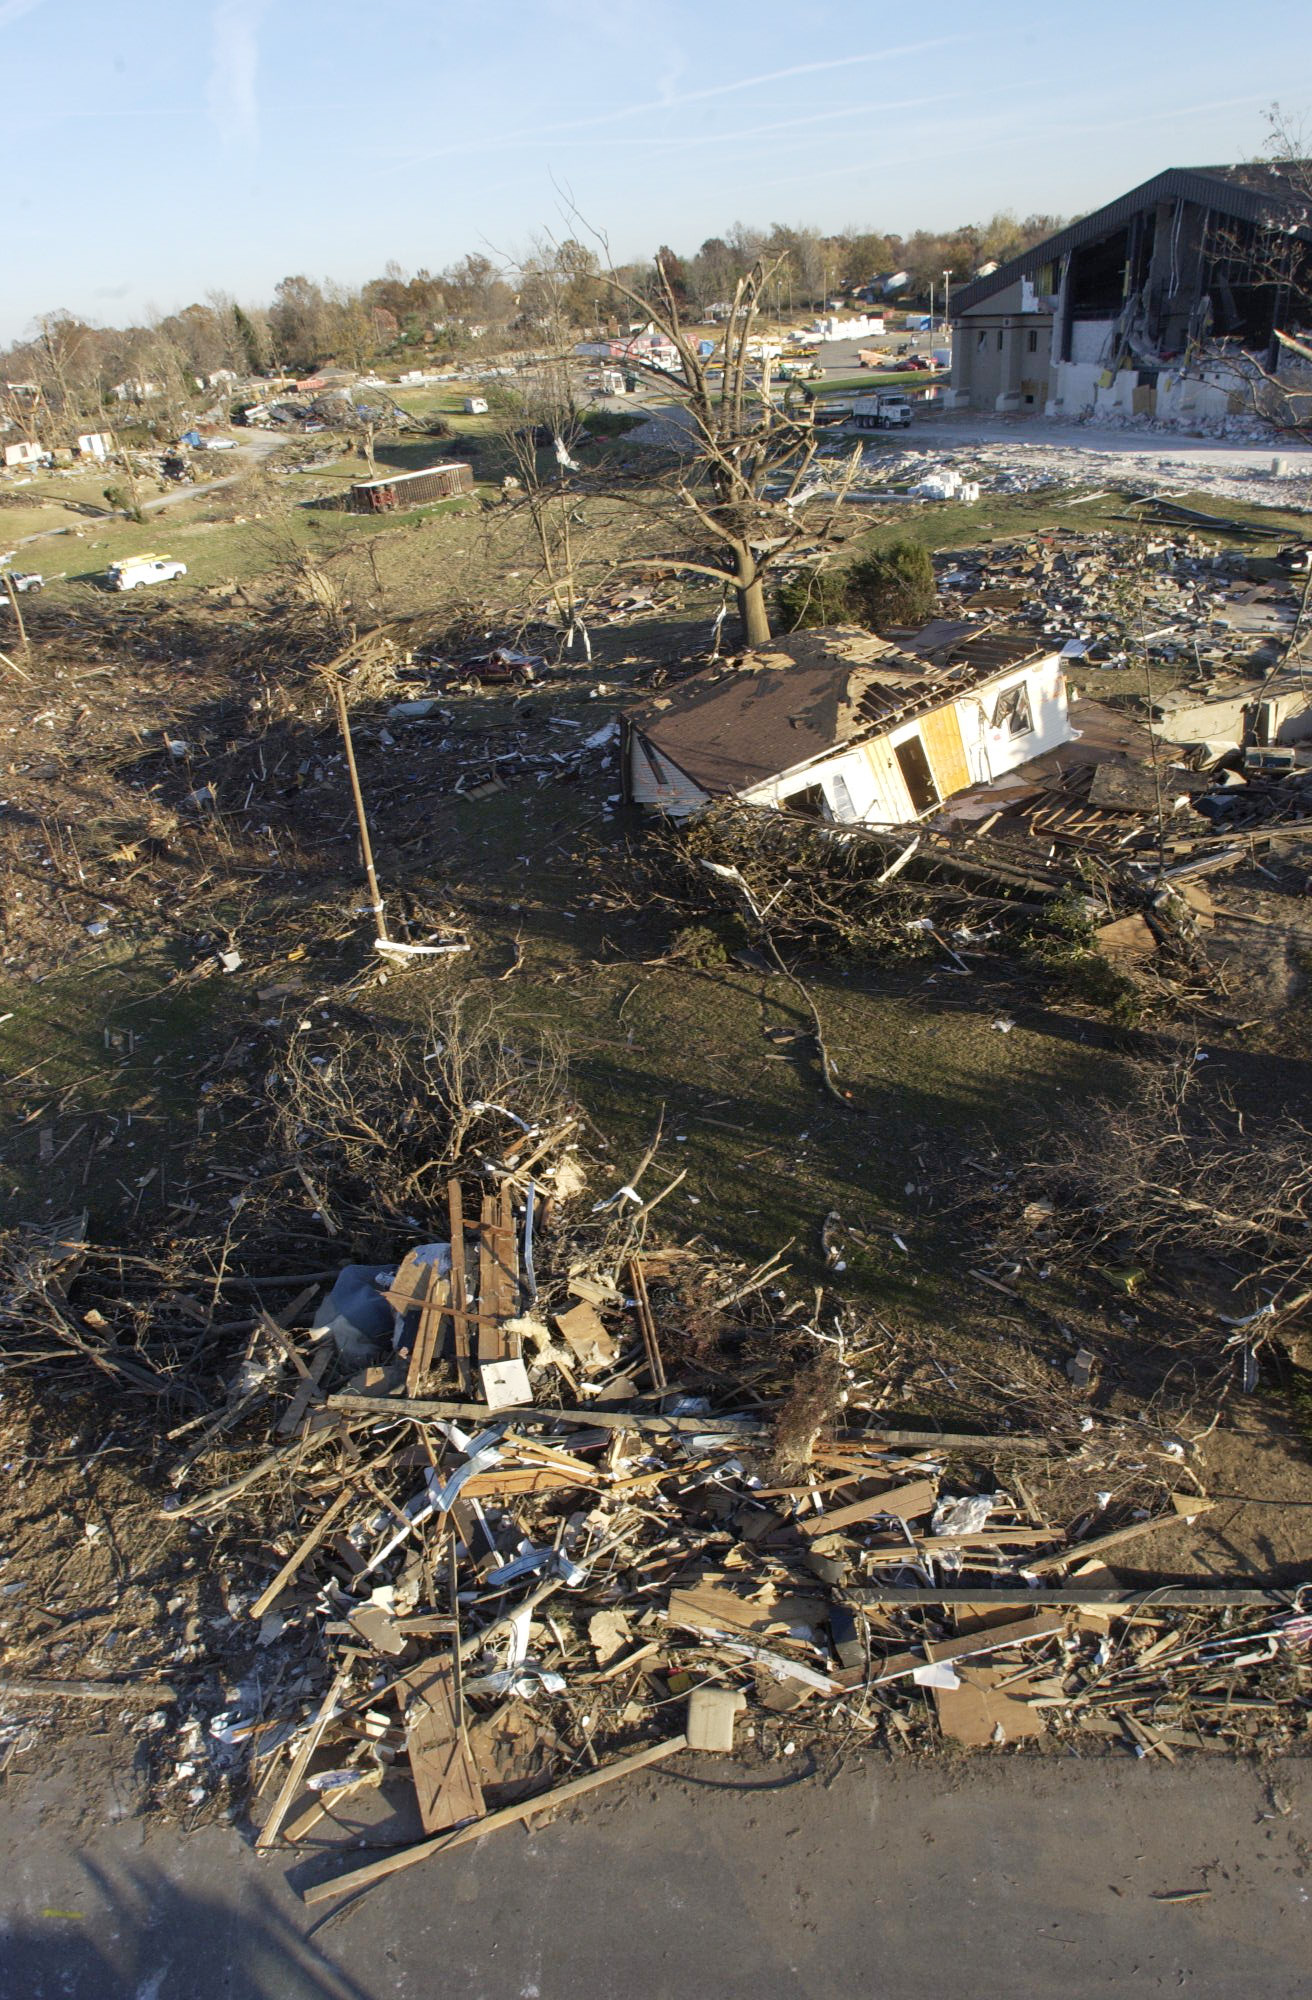 FEMA - 19034 - Photograph by Leif Skoogfors taken on 11-10-2005 in Indiana